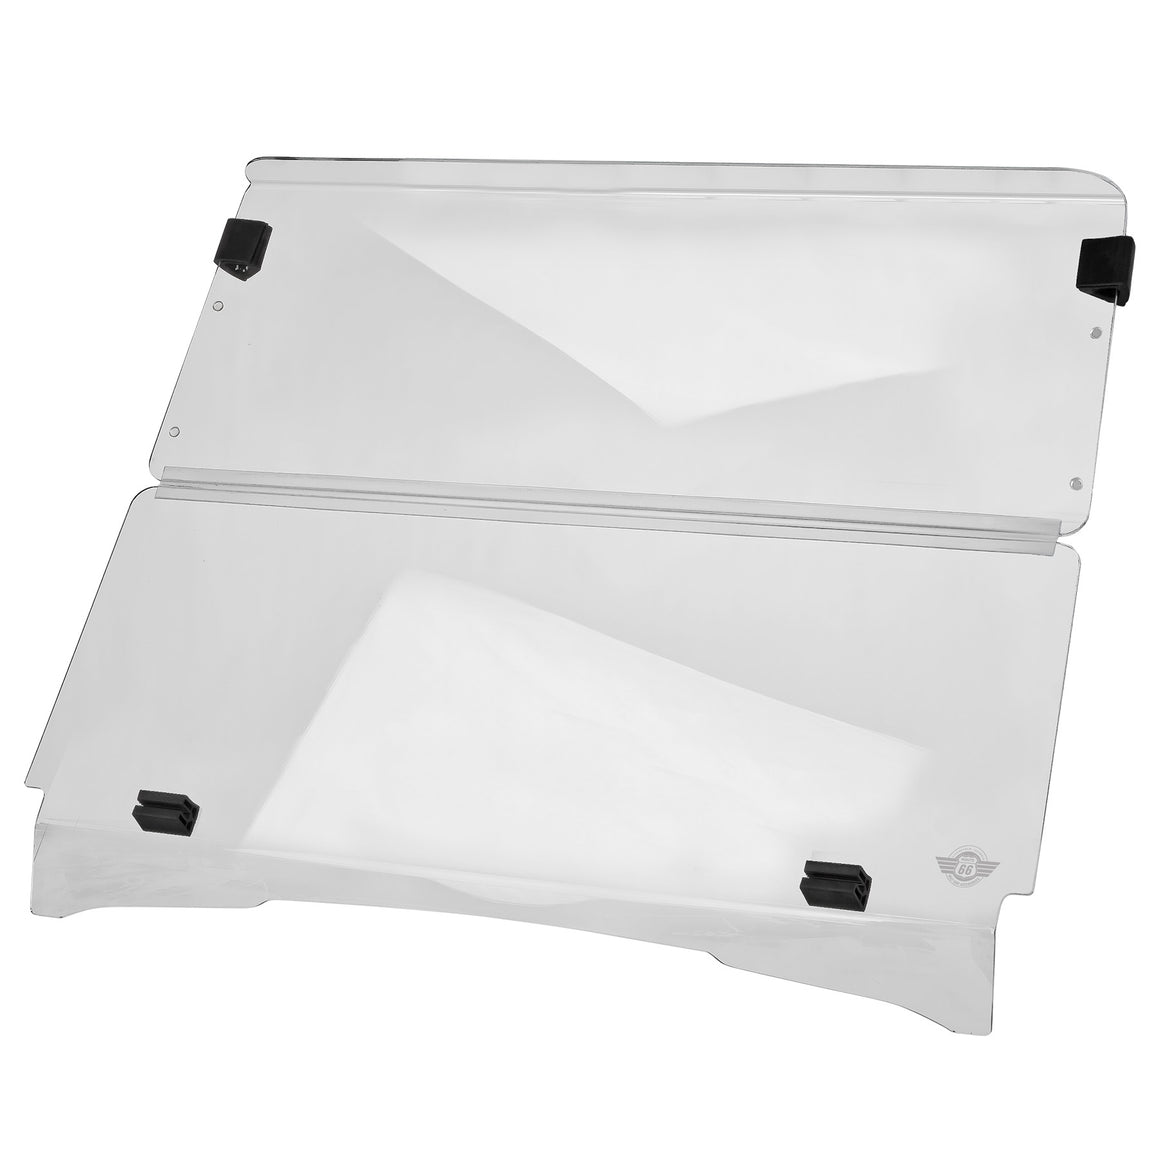 Route 66 Clear Windshield for E-Z-Go TXT 1995-2013